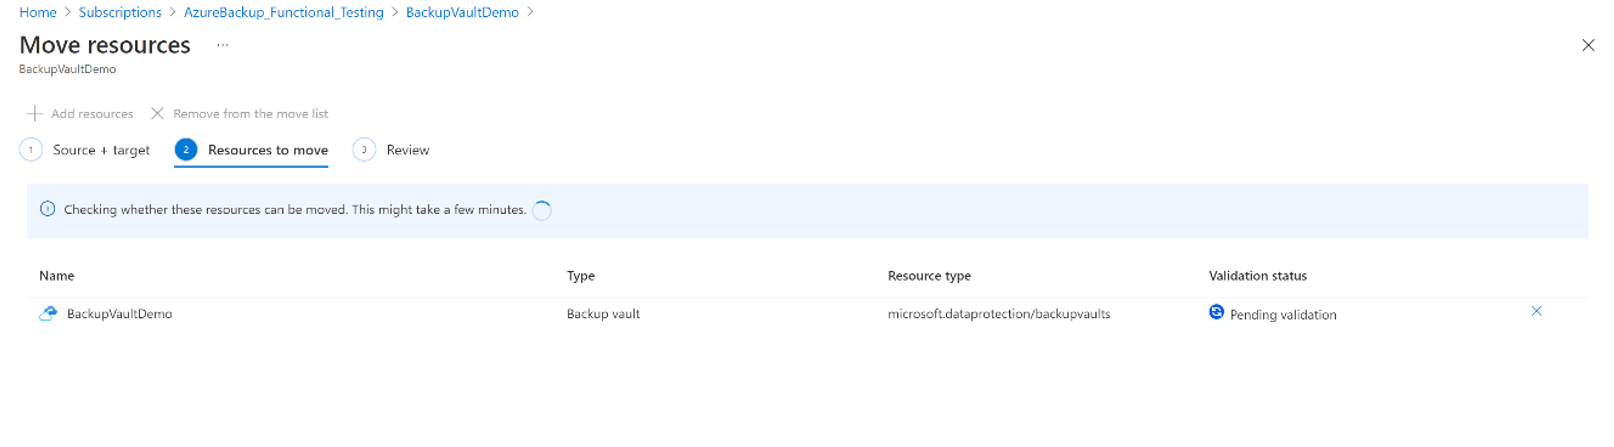 Screenshot showing the validation status of Backup vault to be moved to another Azure subscription.